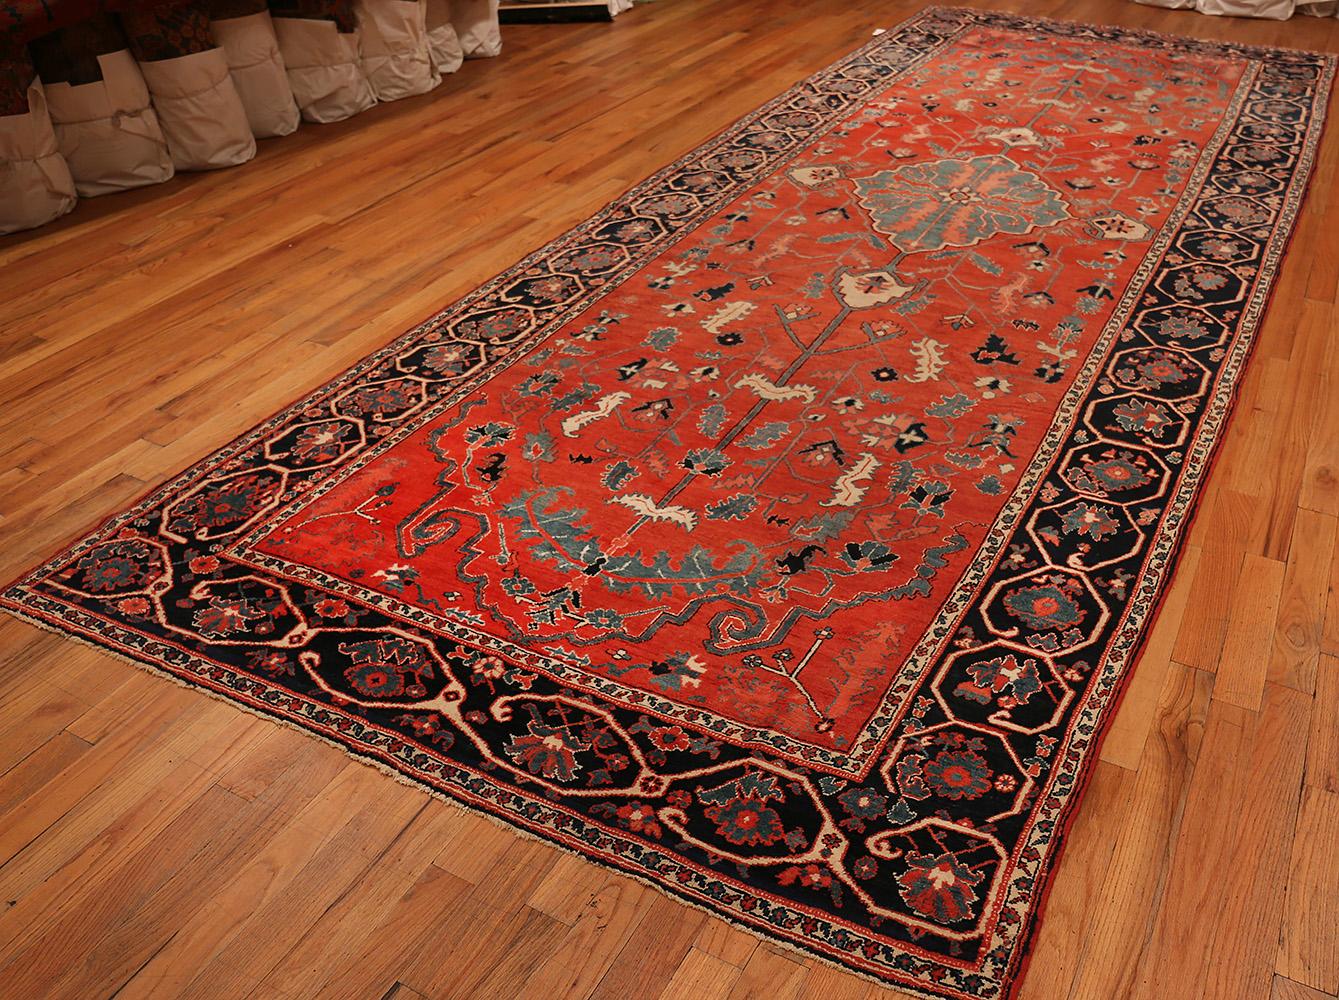 Wool Rare Long and Narrow Antique Persian Heriz Rug. Size: 7 ft x 18 ft